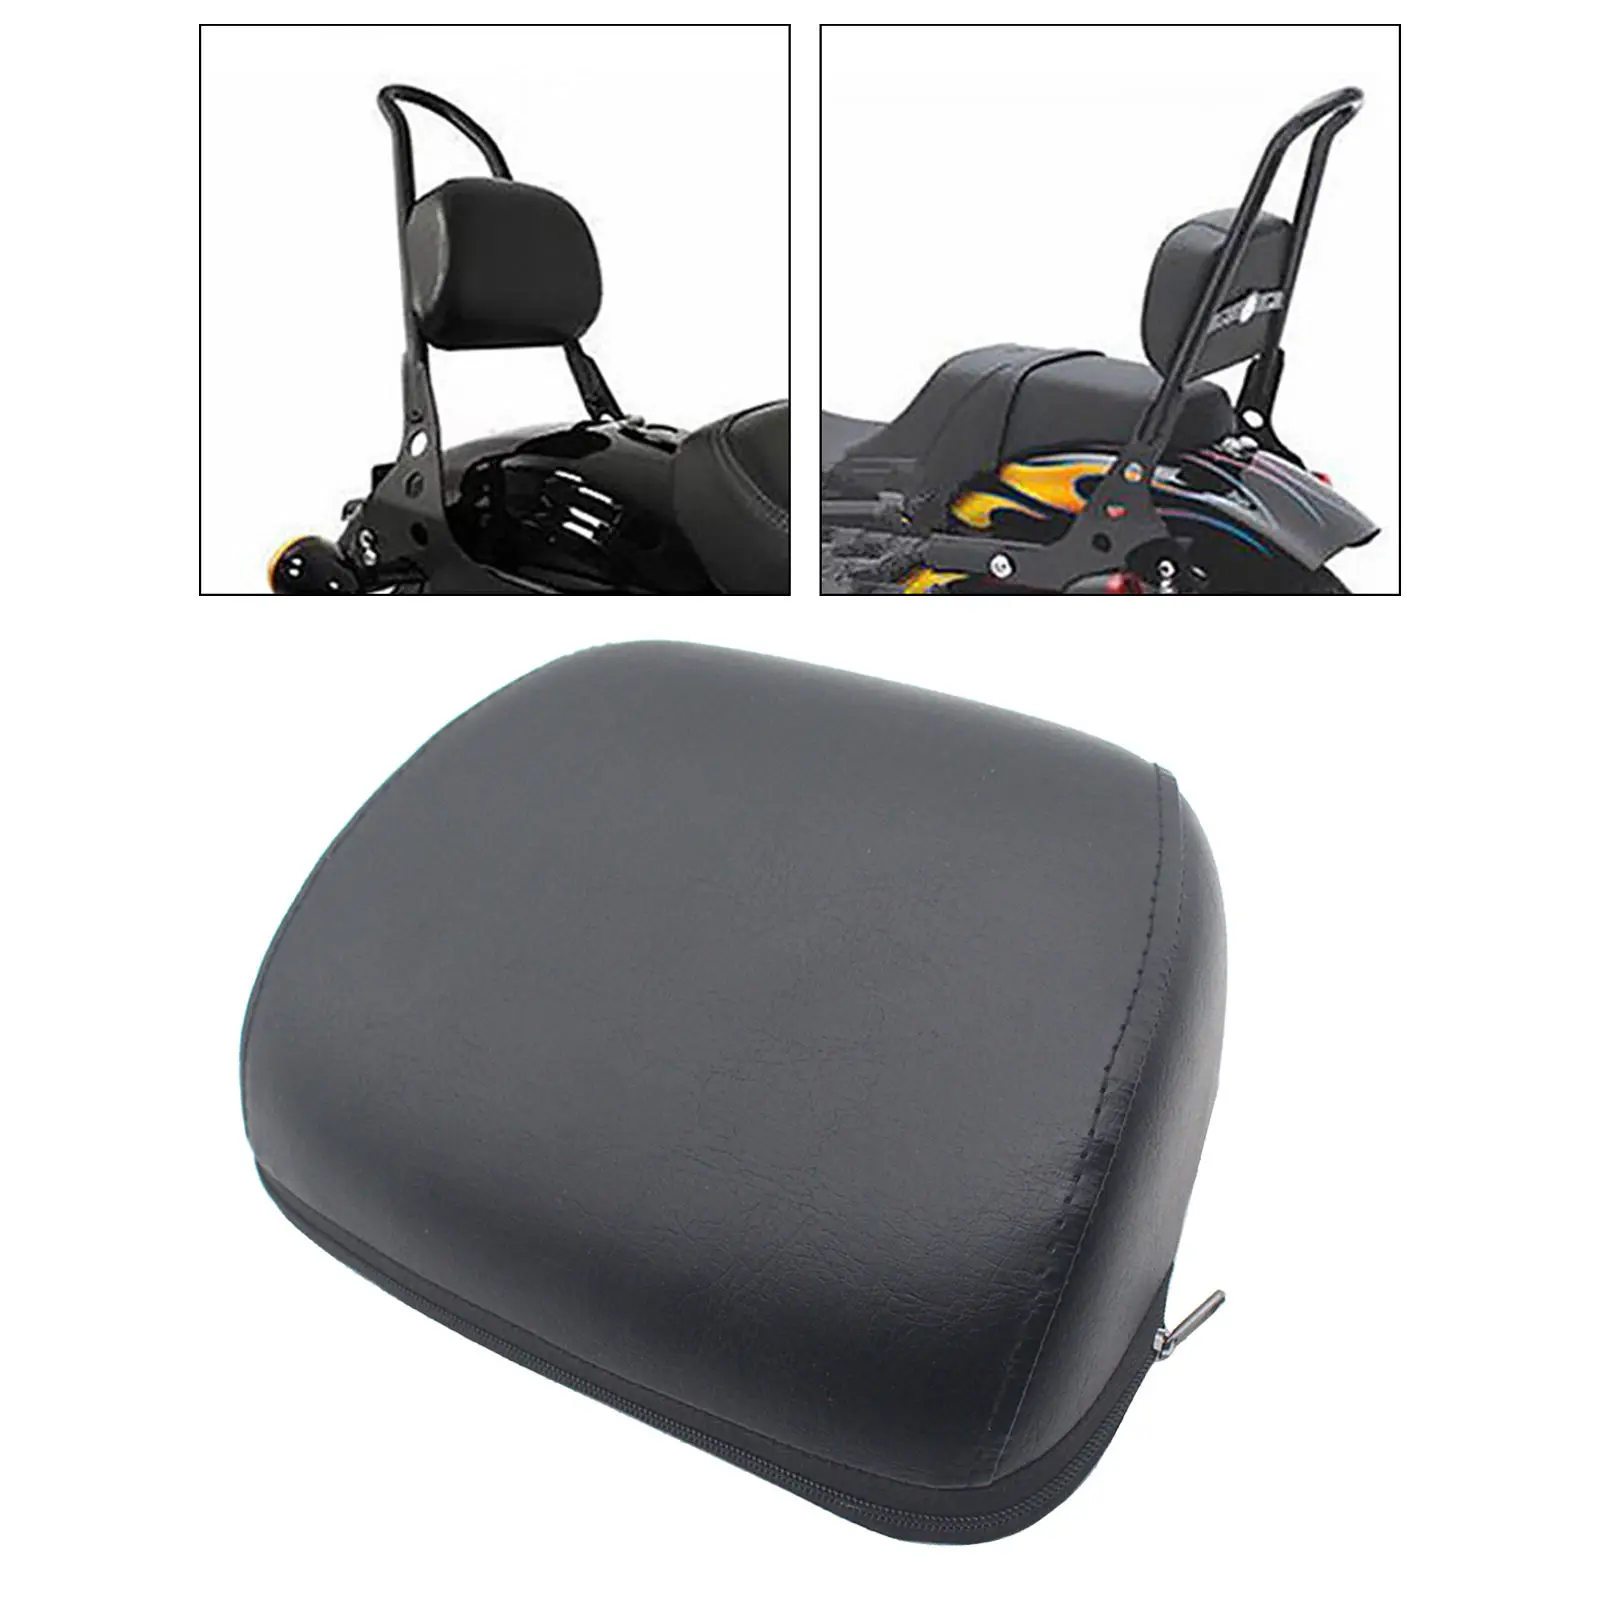 Backrest Pad Pads Back Rest Passenger Sissy Bar Detachable Fit for Harley 883 1200 48 Replacement Part Comfortable